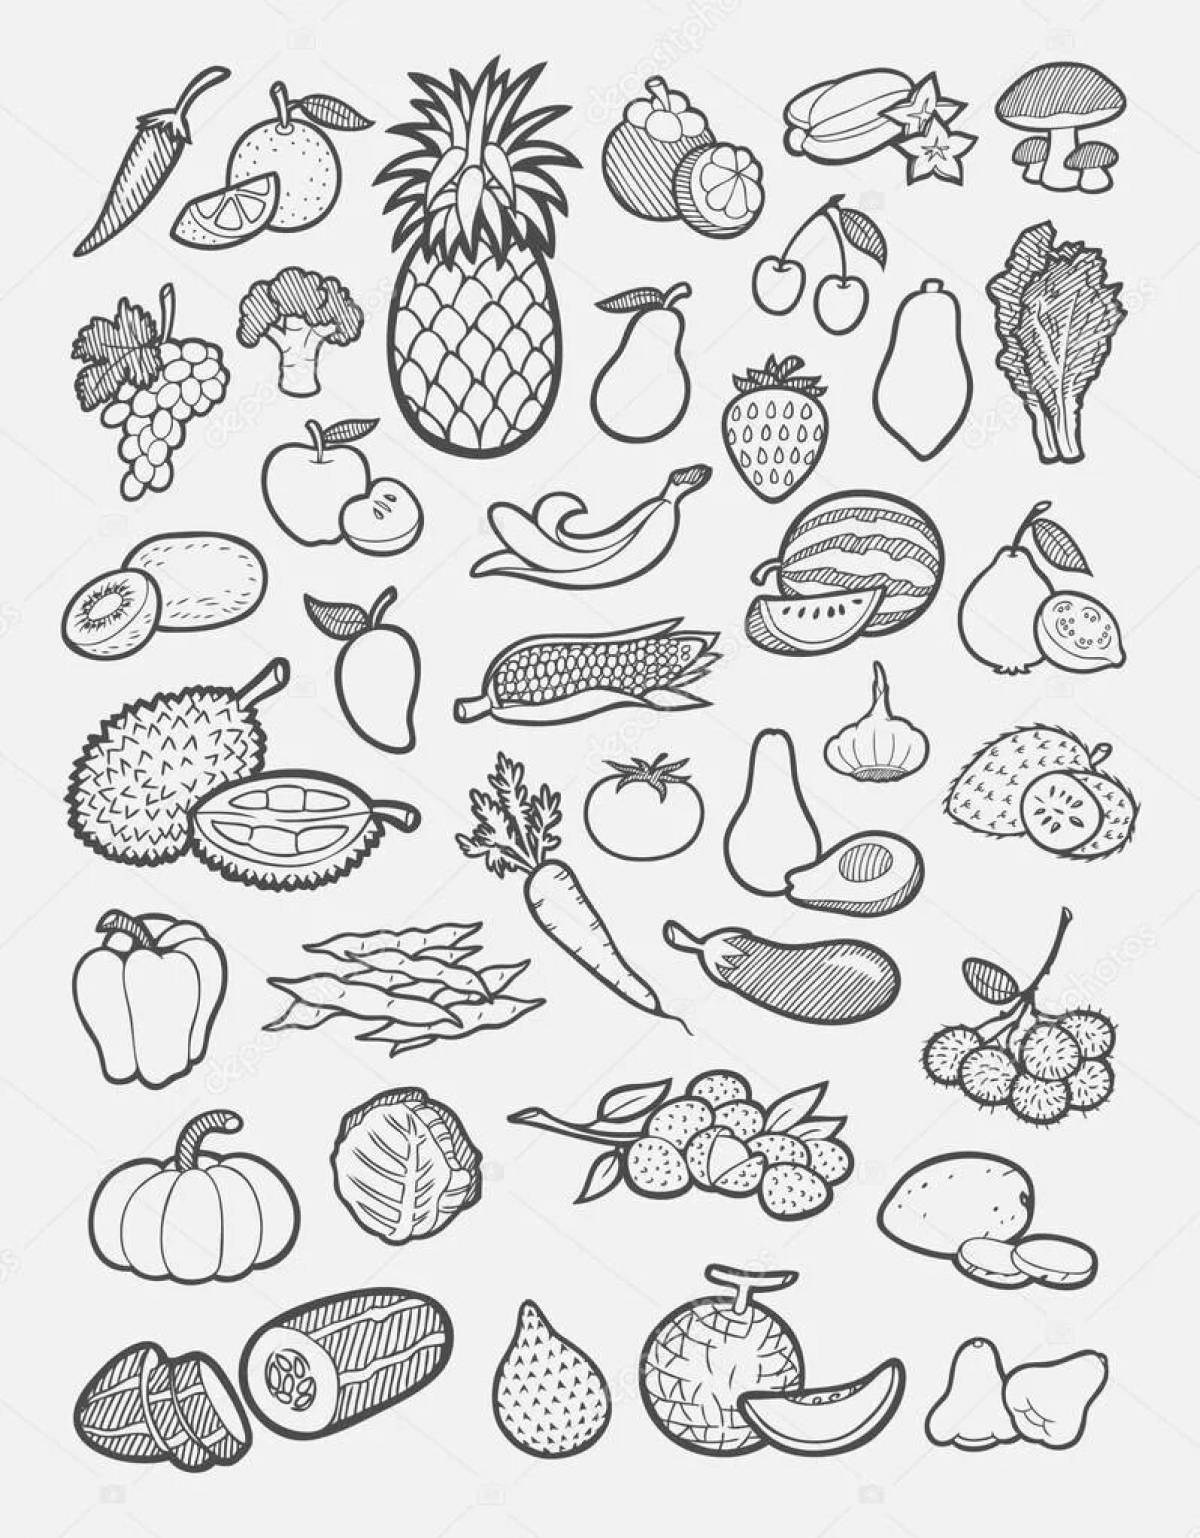 Outstanding avocado sticker coloring page